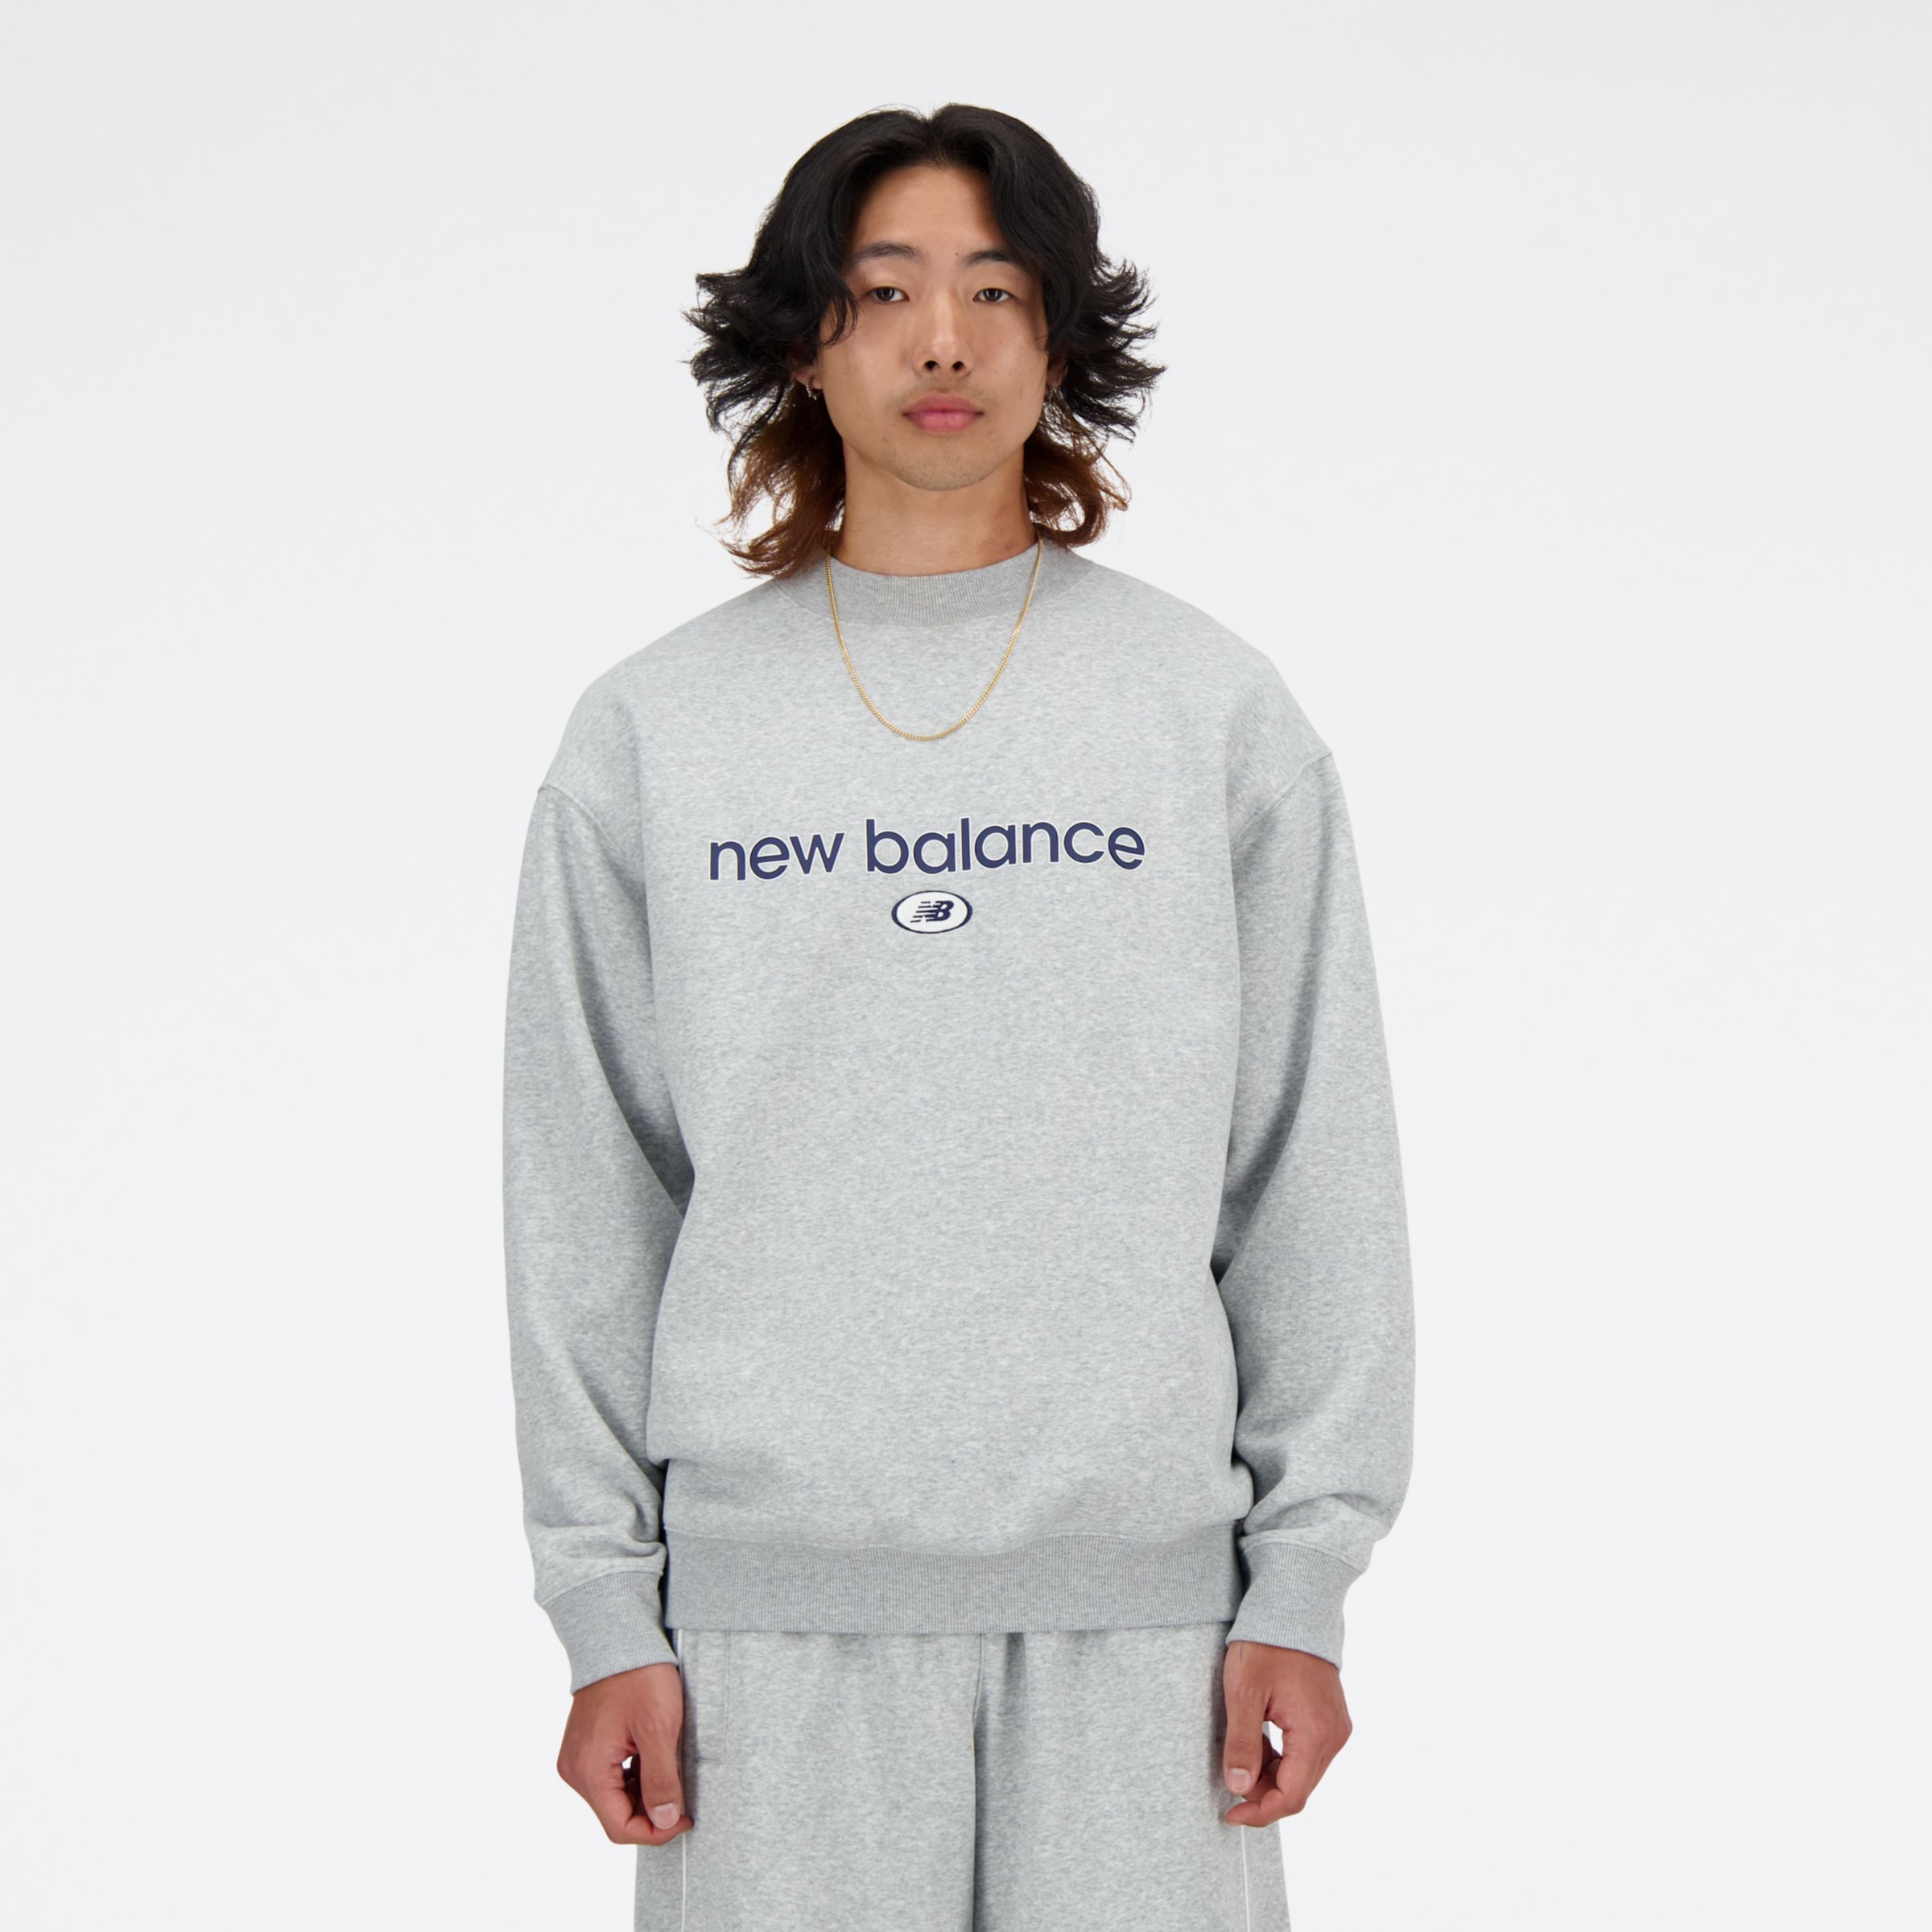 New Balance Hoops Crew Neck Sweatshirt In Athletic Grey, Men's At Urban Outfitters